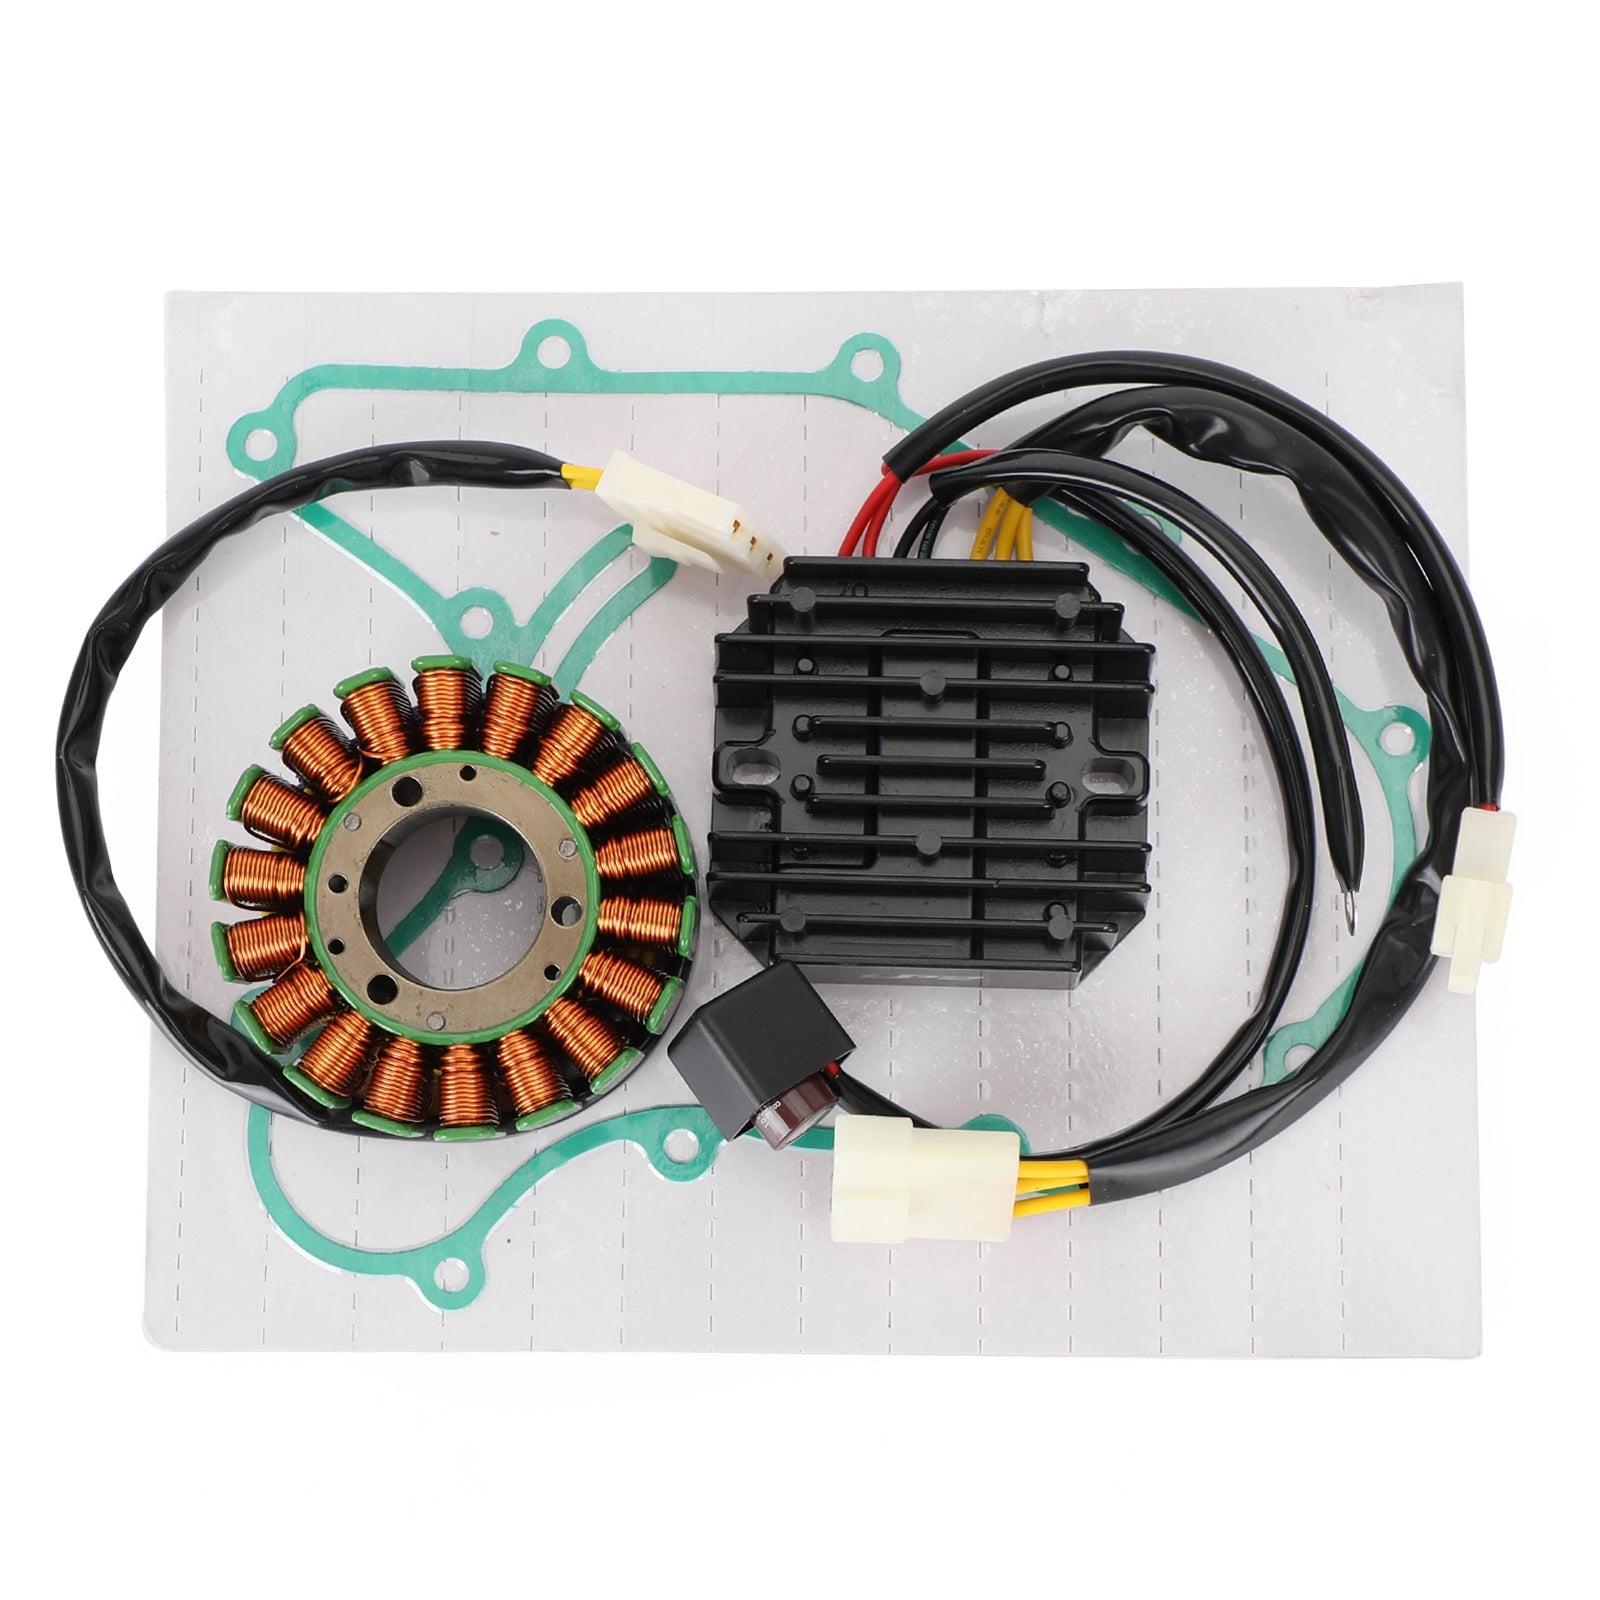 Magneto Coil Stator + Voltage Regulator + Gasket Assy For RC 390 RC 250 2015-2021 Generic[FedEx Shipping]